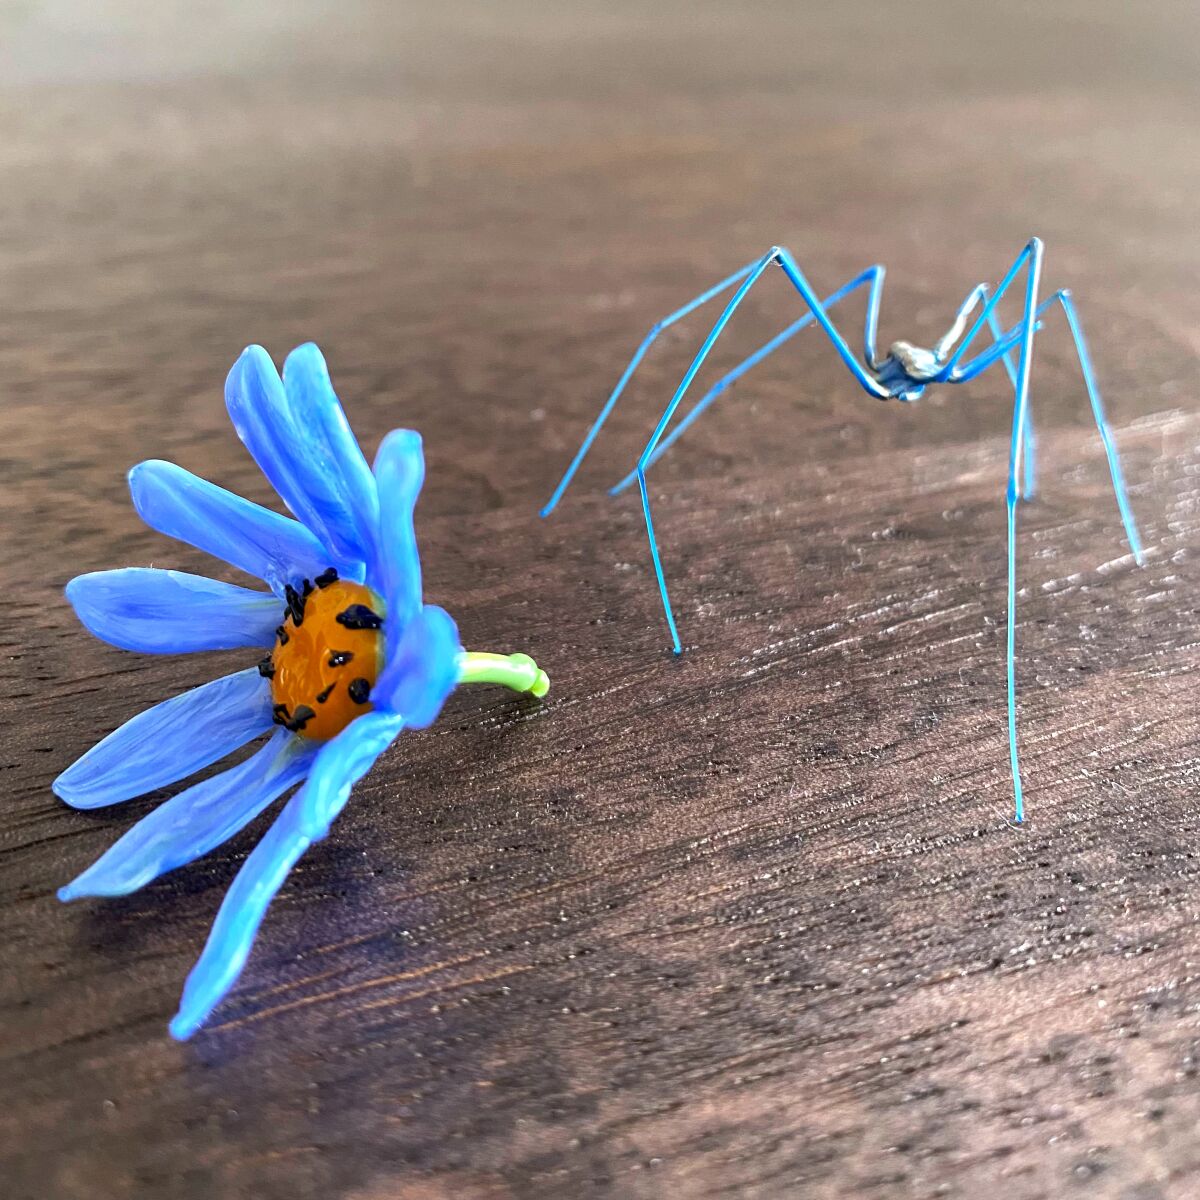 Flower and spider, Venetian glass wonders, bought in 2019.